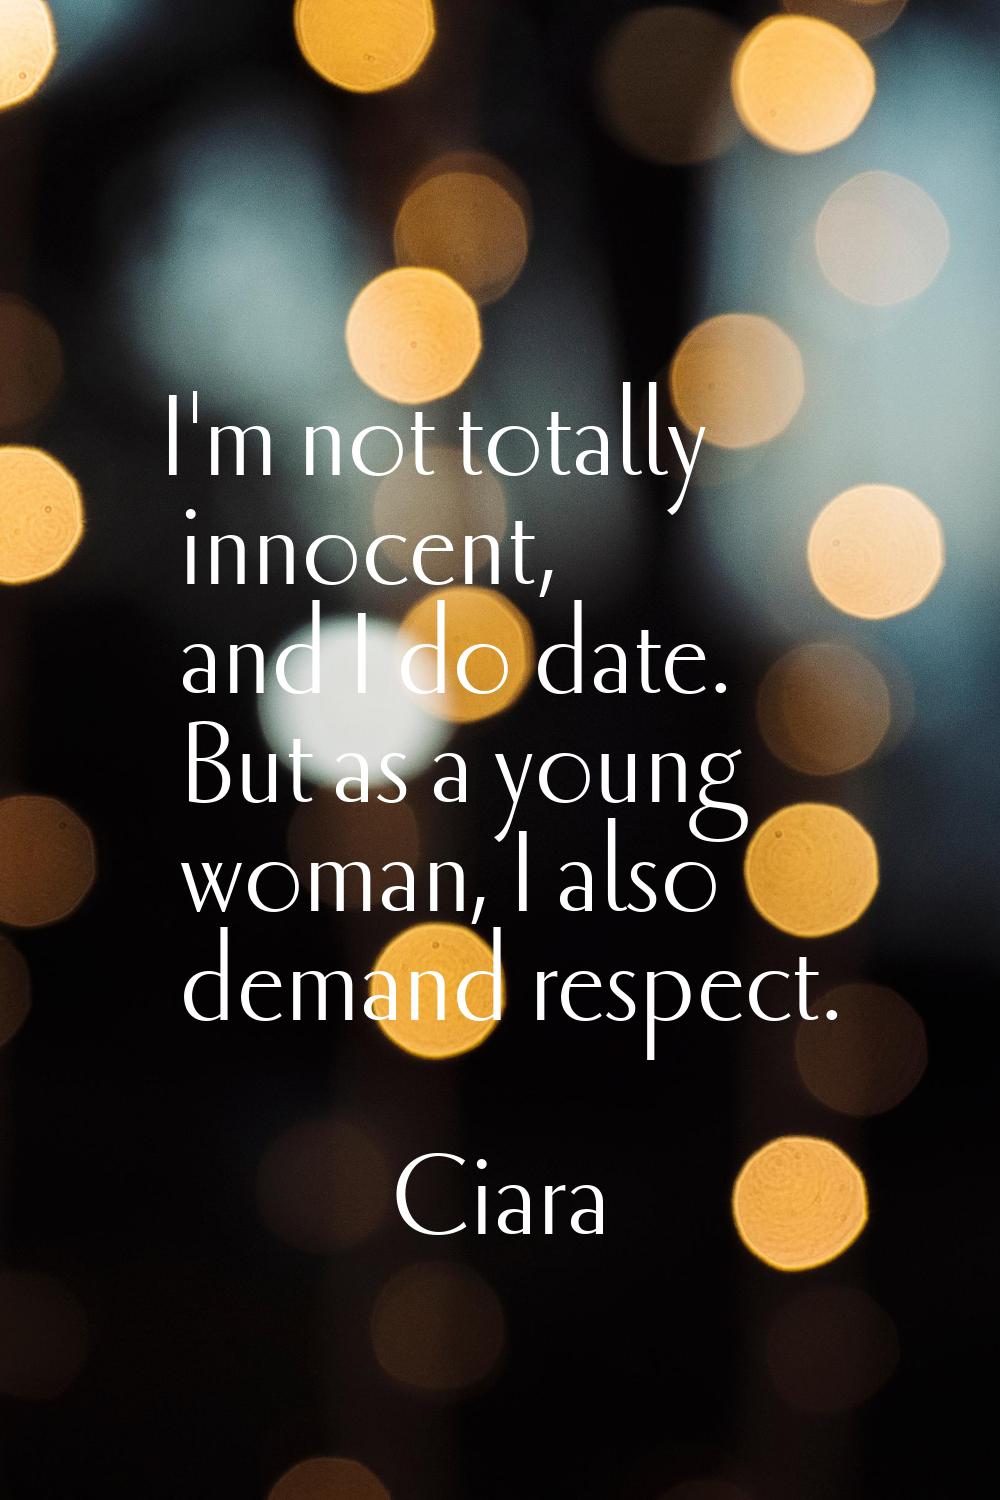 I'm not totally innocent, and I do date. But as a young woman, I also demand respect.